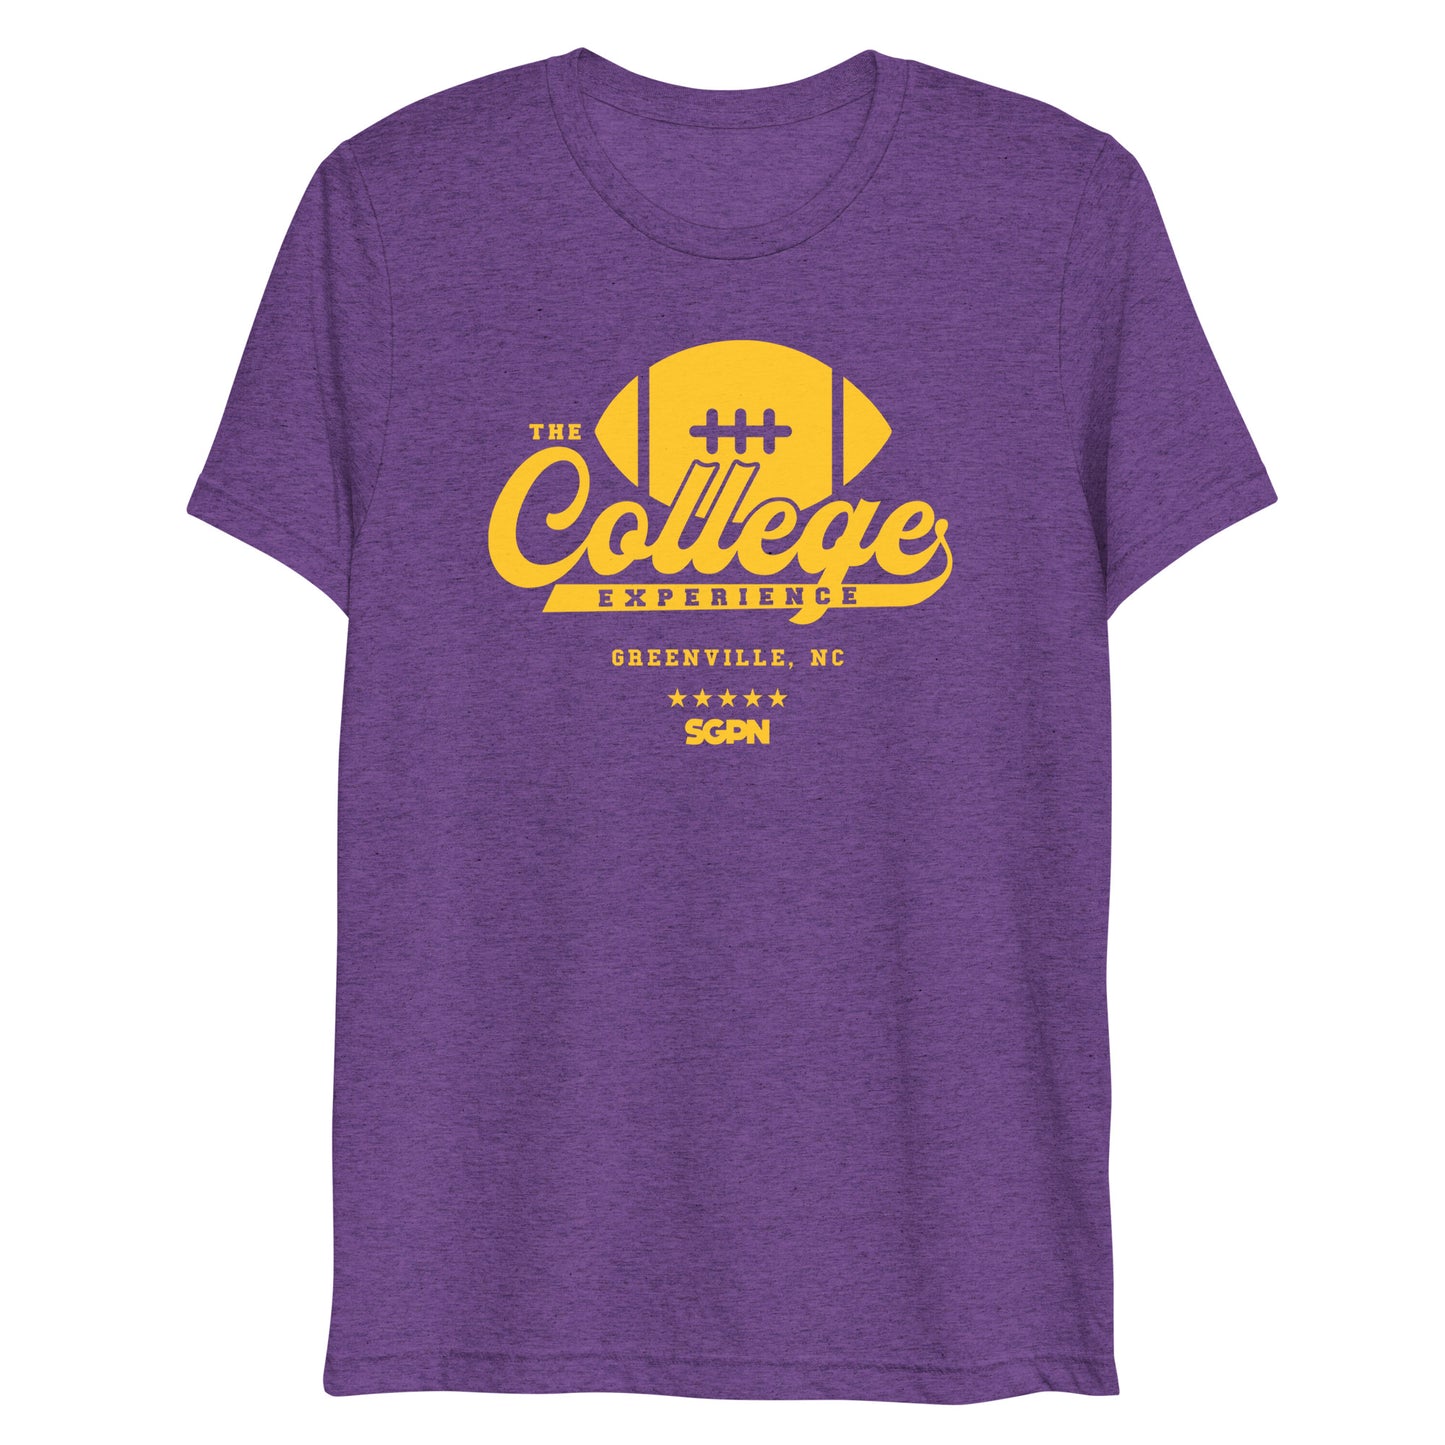 The College Football Experience - Greenville edition - Purple Short sleeve t-shirt